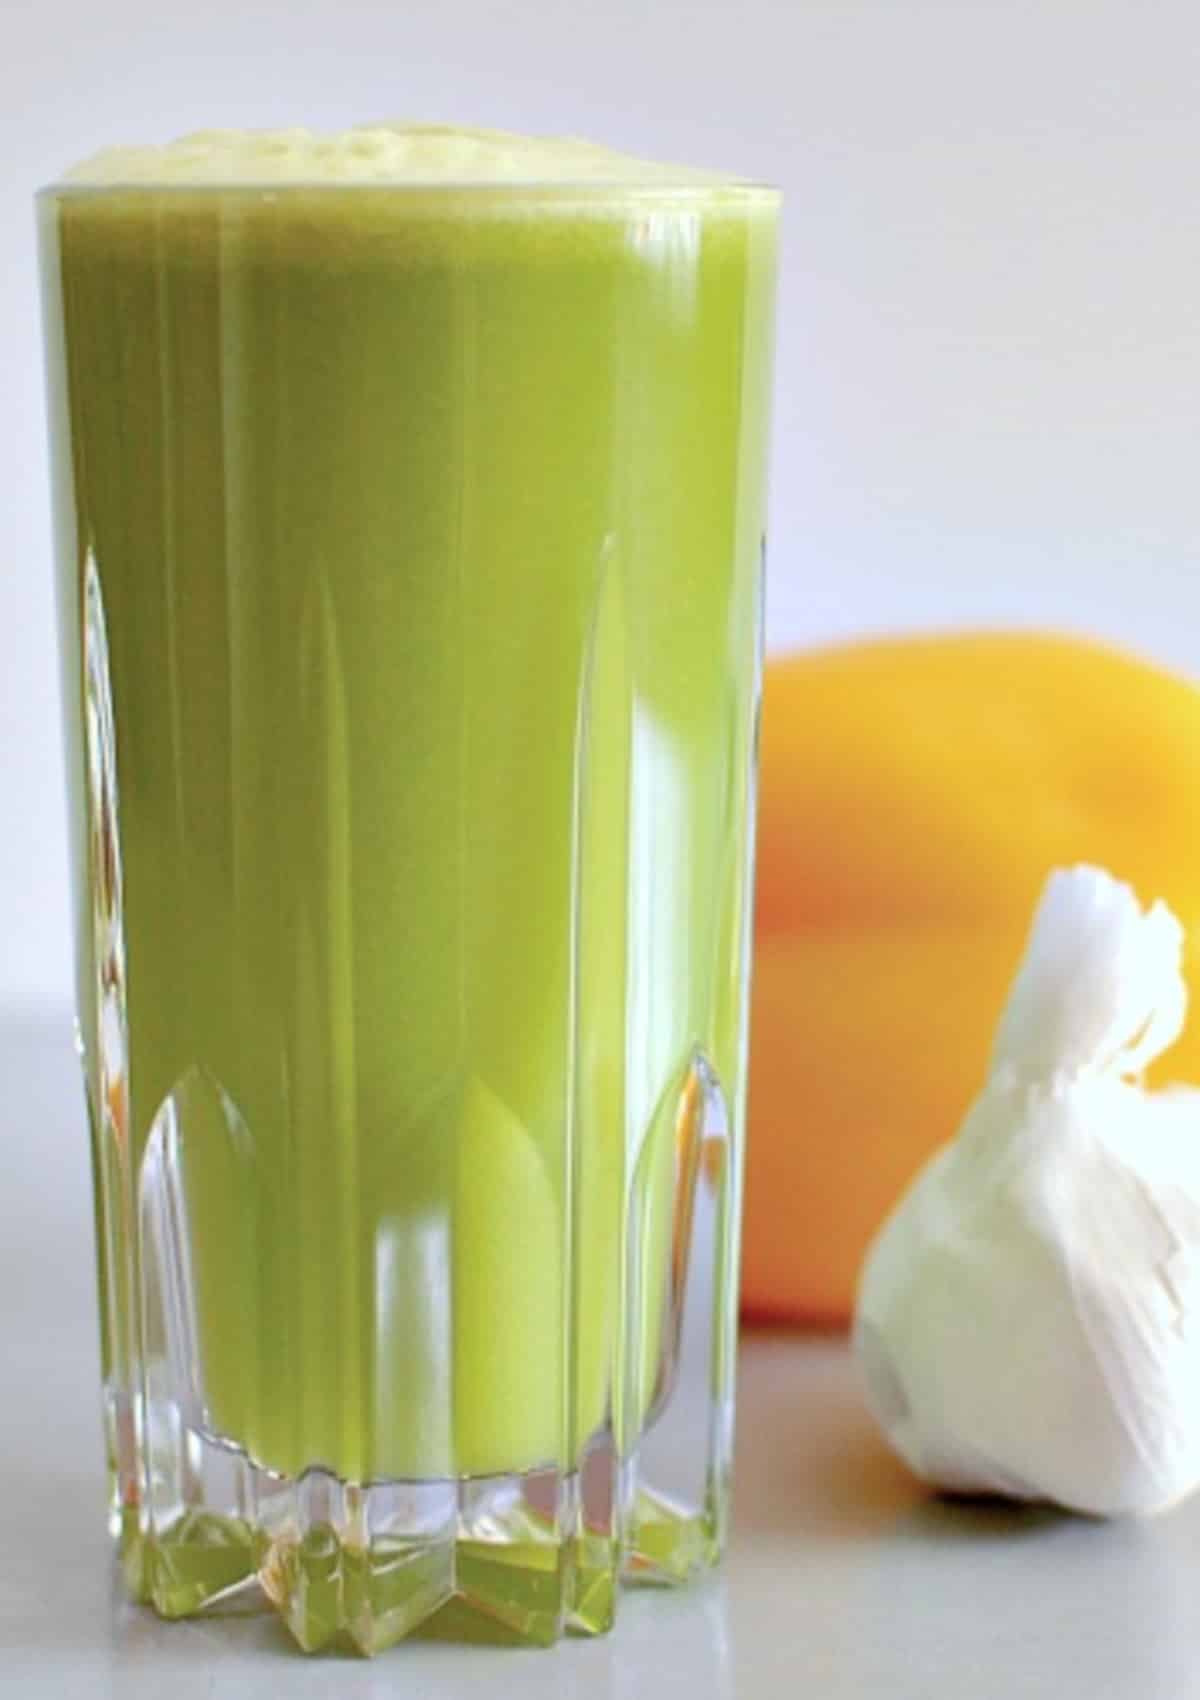 side view of bright green garlic apple juice in a tall cut crystal glass. juice has light green foam on top, and there is a yellow bell pepper and a white bulb of garlic sitting beside the glass of juice.